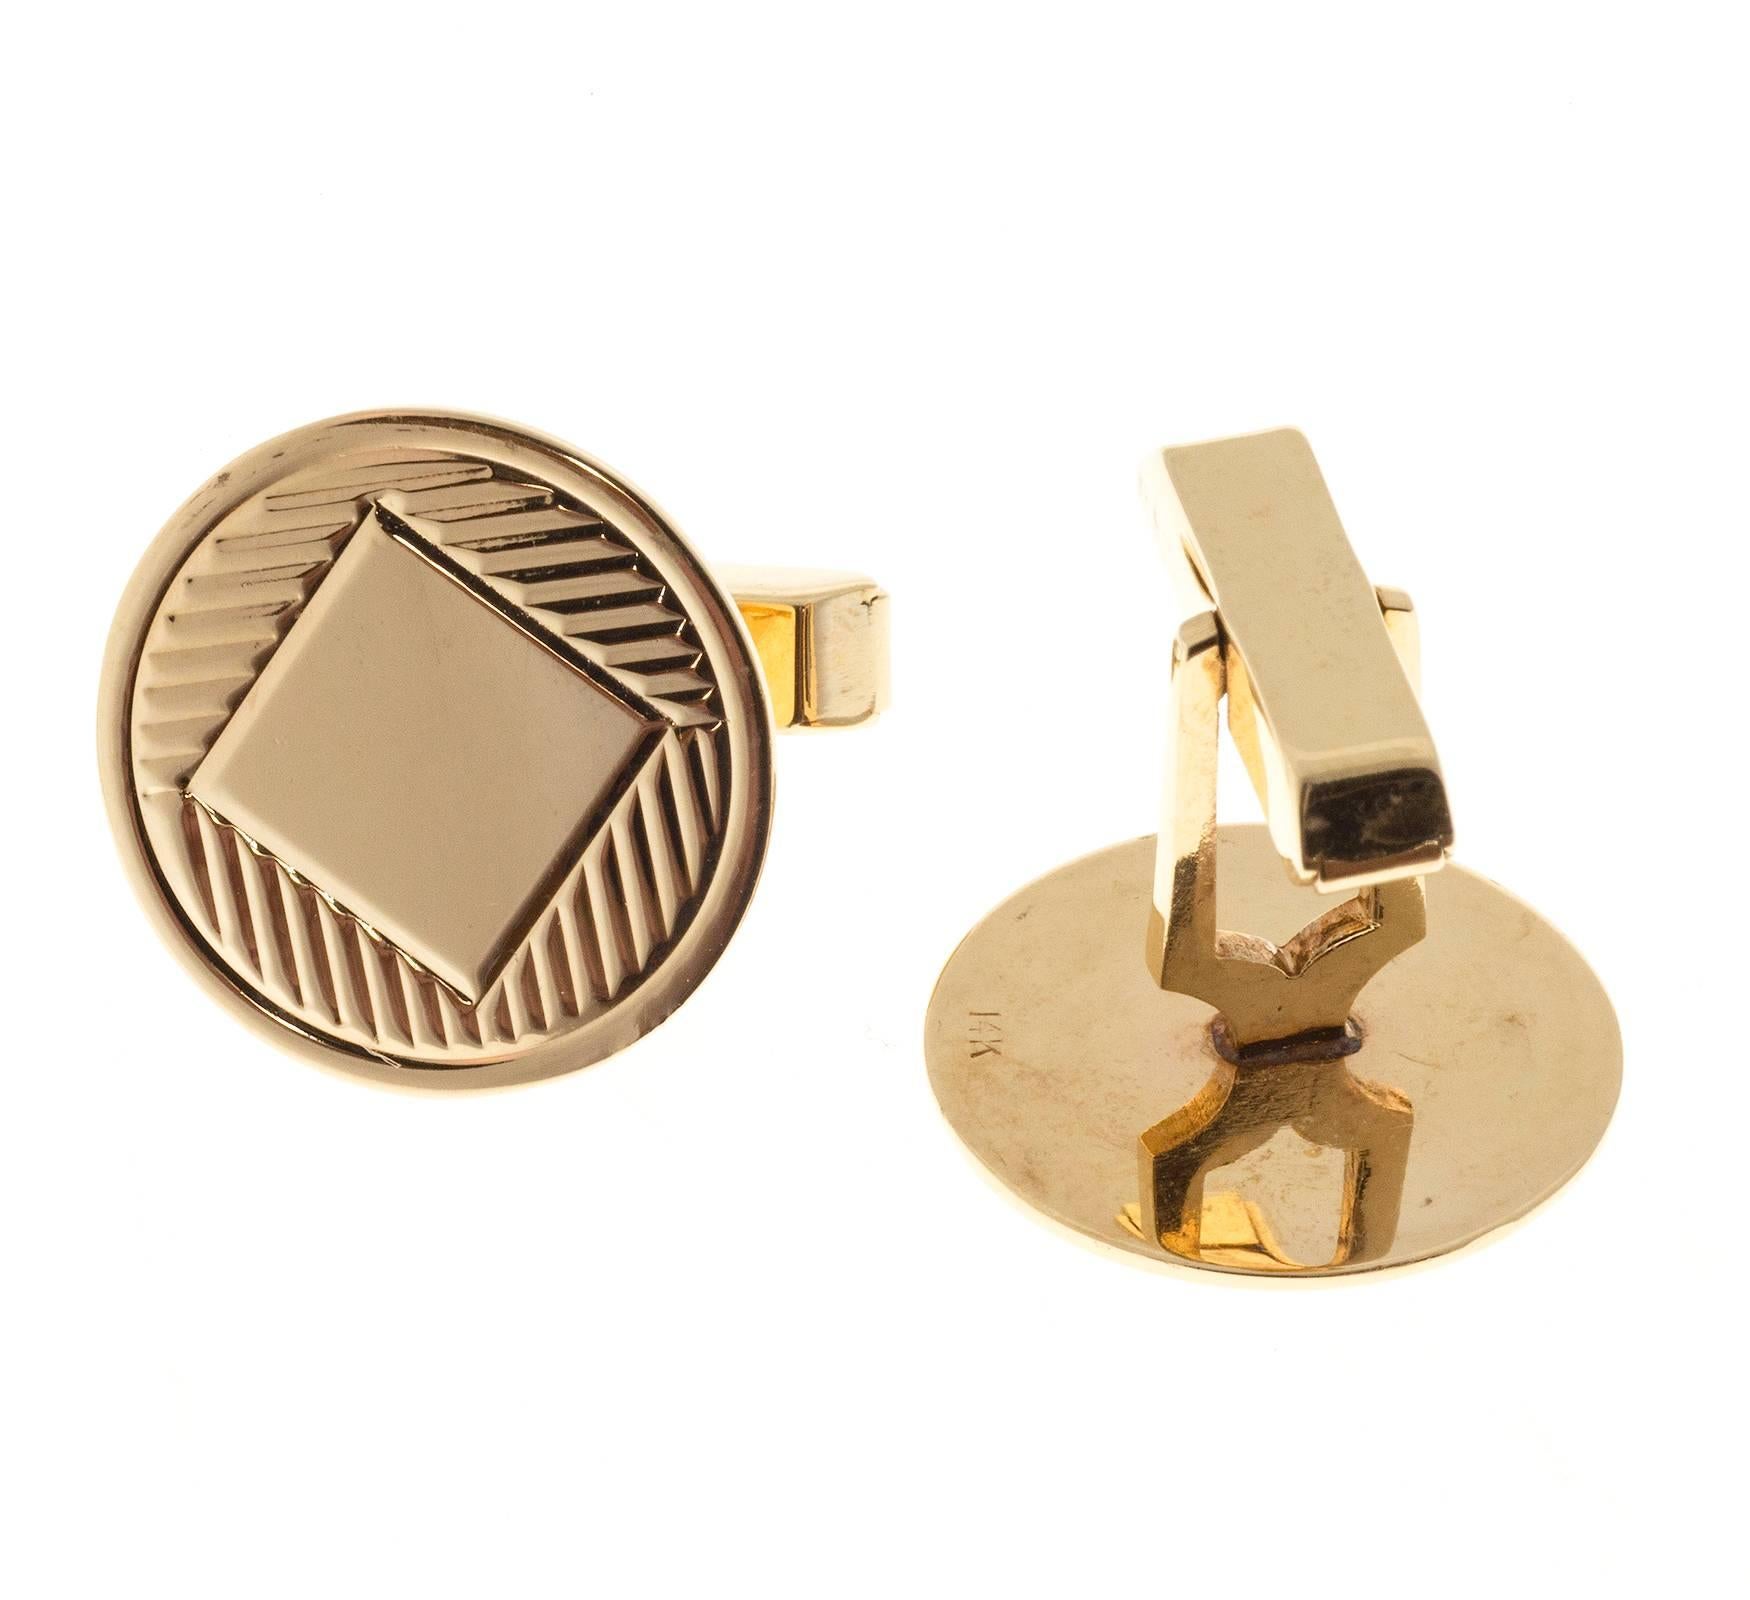 14k gold round clip back cufflinks. Clip style backs. 1960s

14k Yellow Gold
Stamped: 14k
10.4 grams
Diameter: 19mm or 3/4 inch
Thick: .80mm

